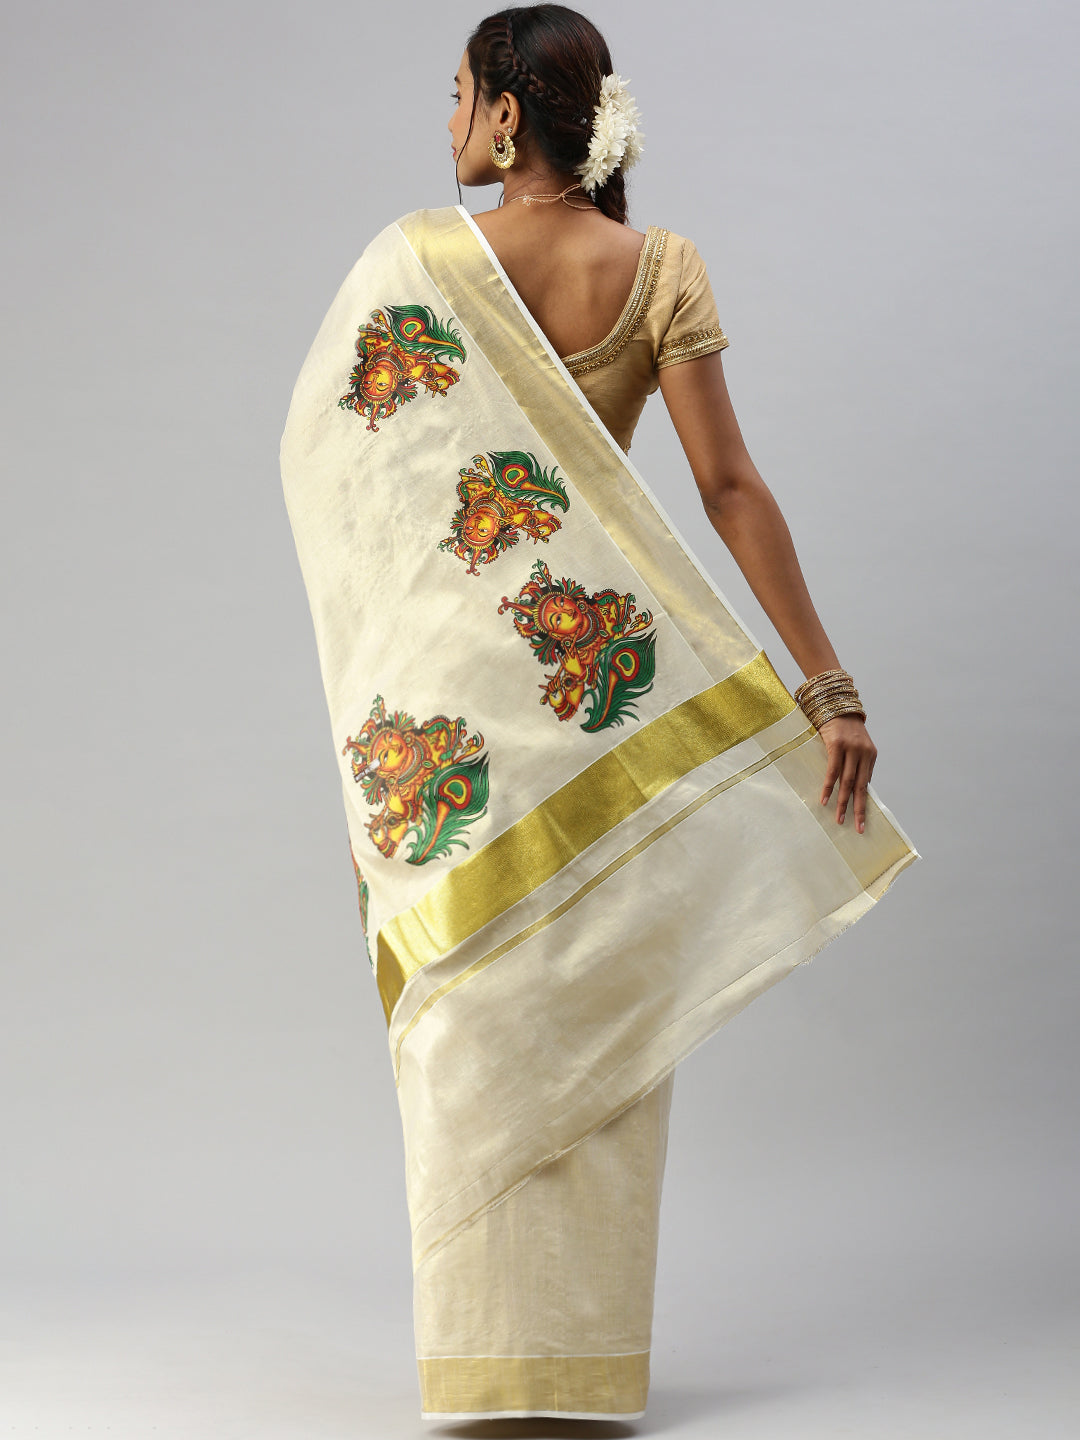 Ramraj Cotton - Look humble and majestic as you wear elegant #Sarees from  the house of Ramraj Cotton. #ShopOnline at www.ramrajcotton.in | Facebook